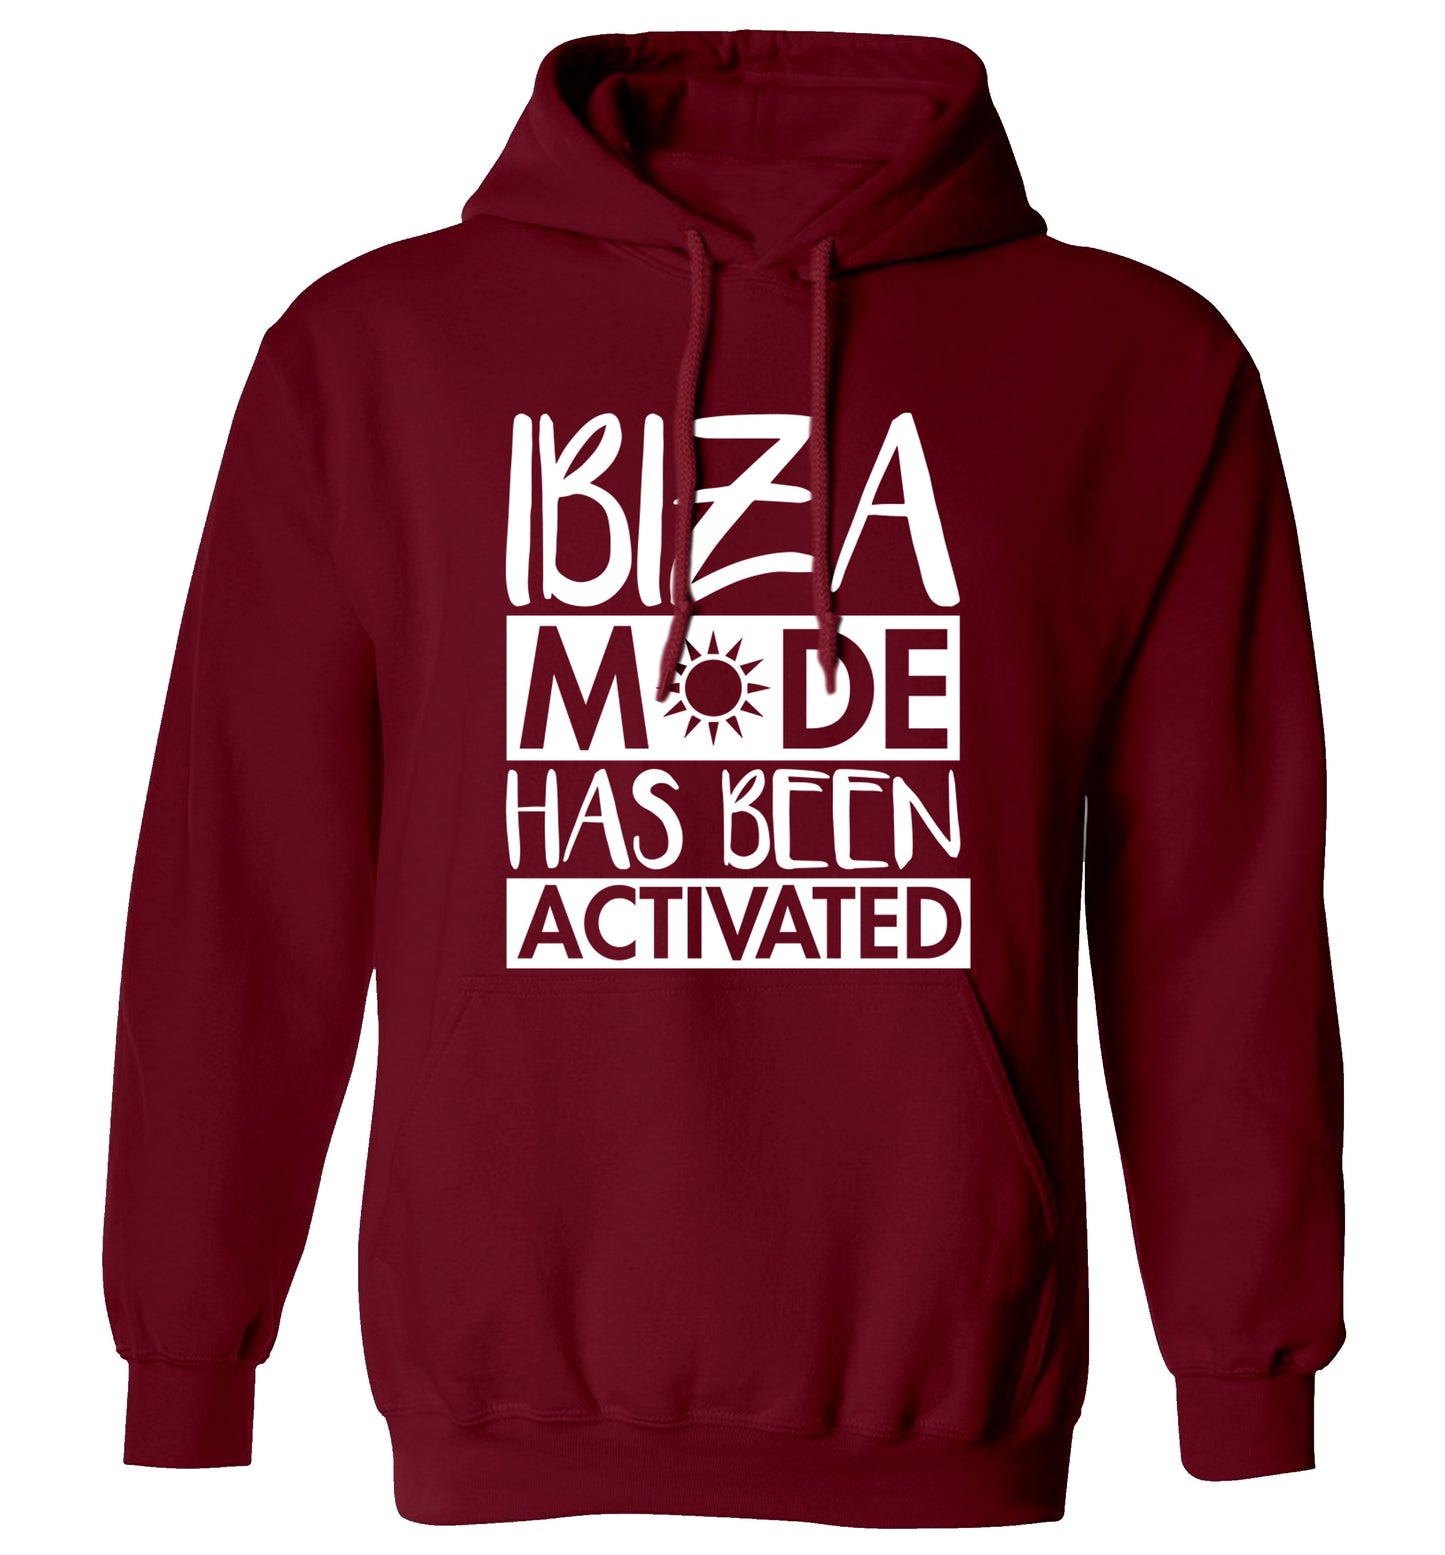 Ibiza mode has been activated adults unisex maroon hoodie 2XL